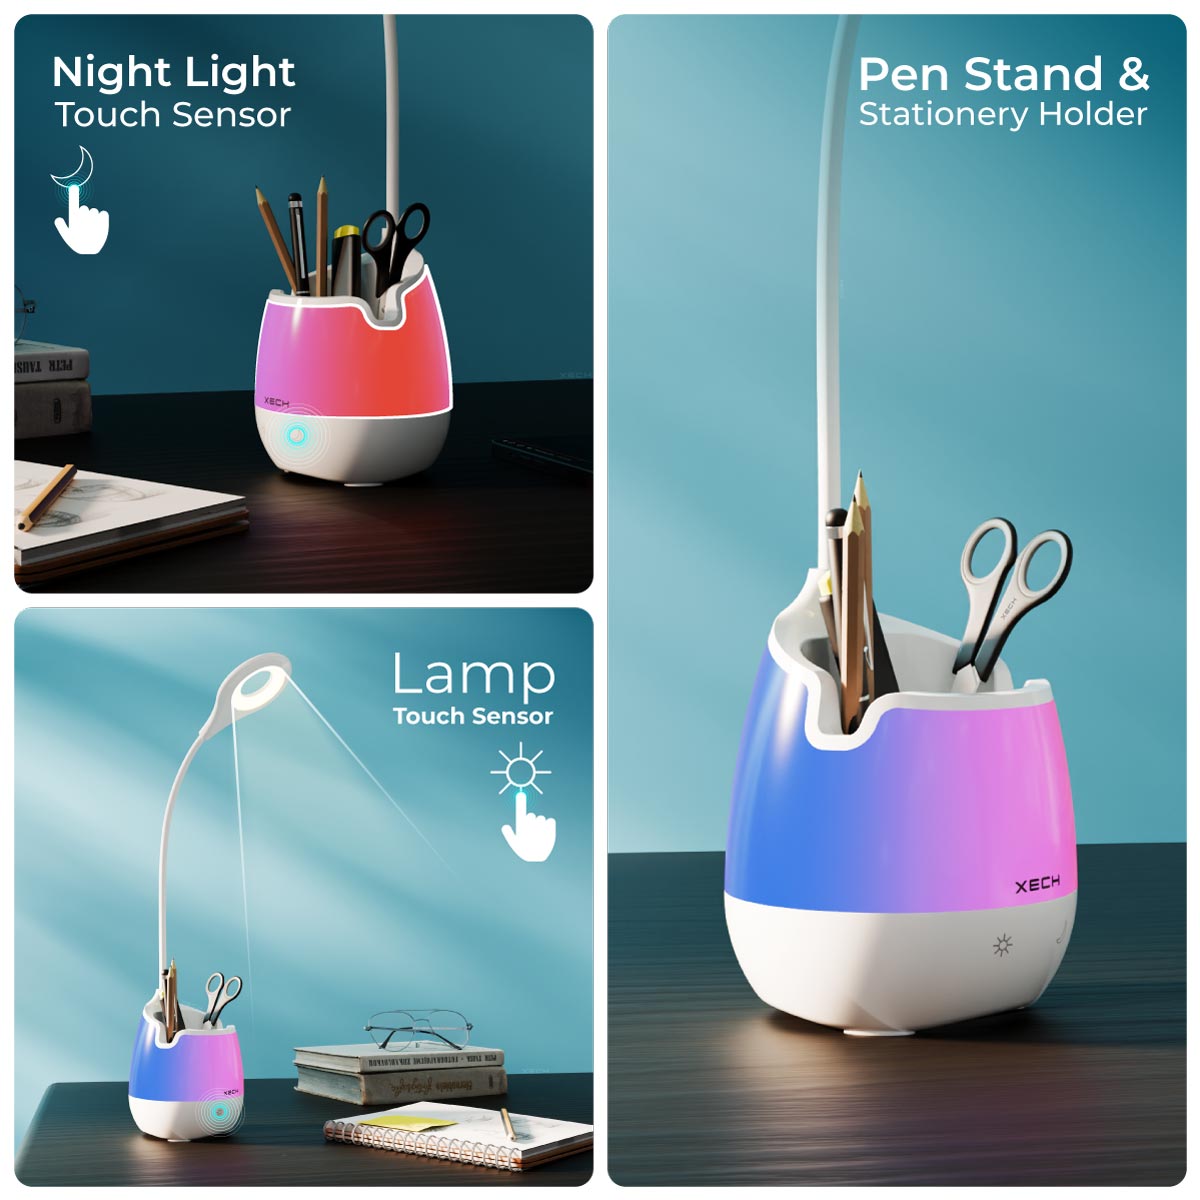 xech desk lamp for study led light touch lamps with pen stand lumos